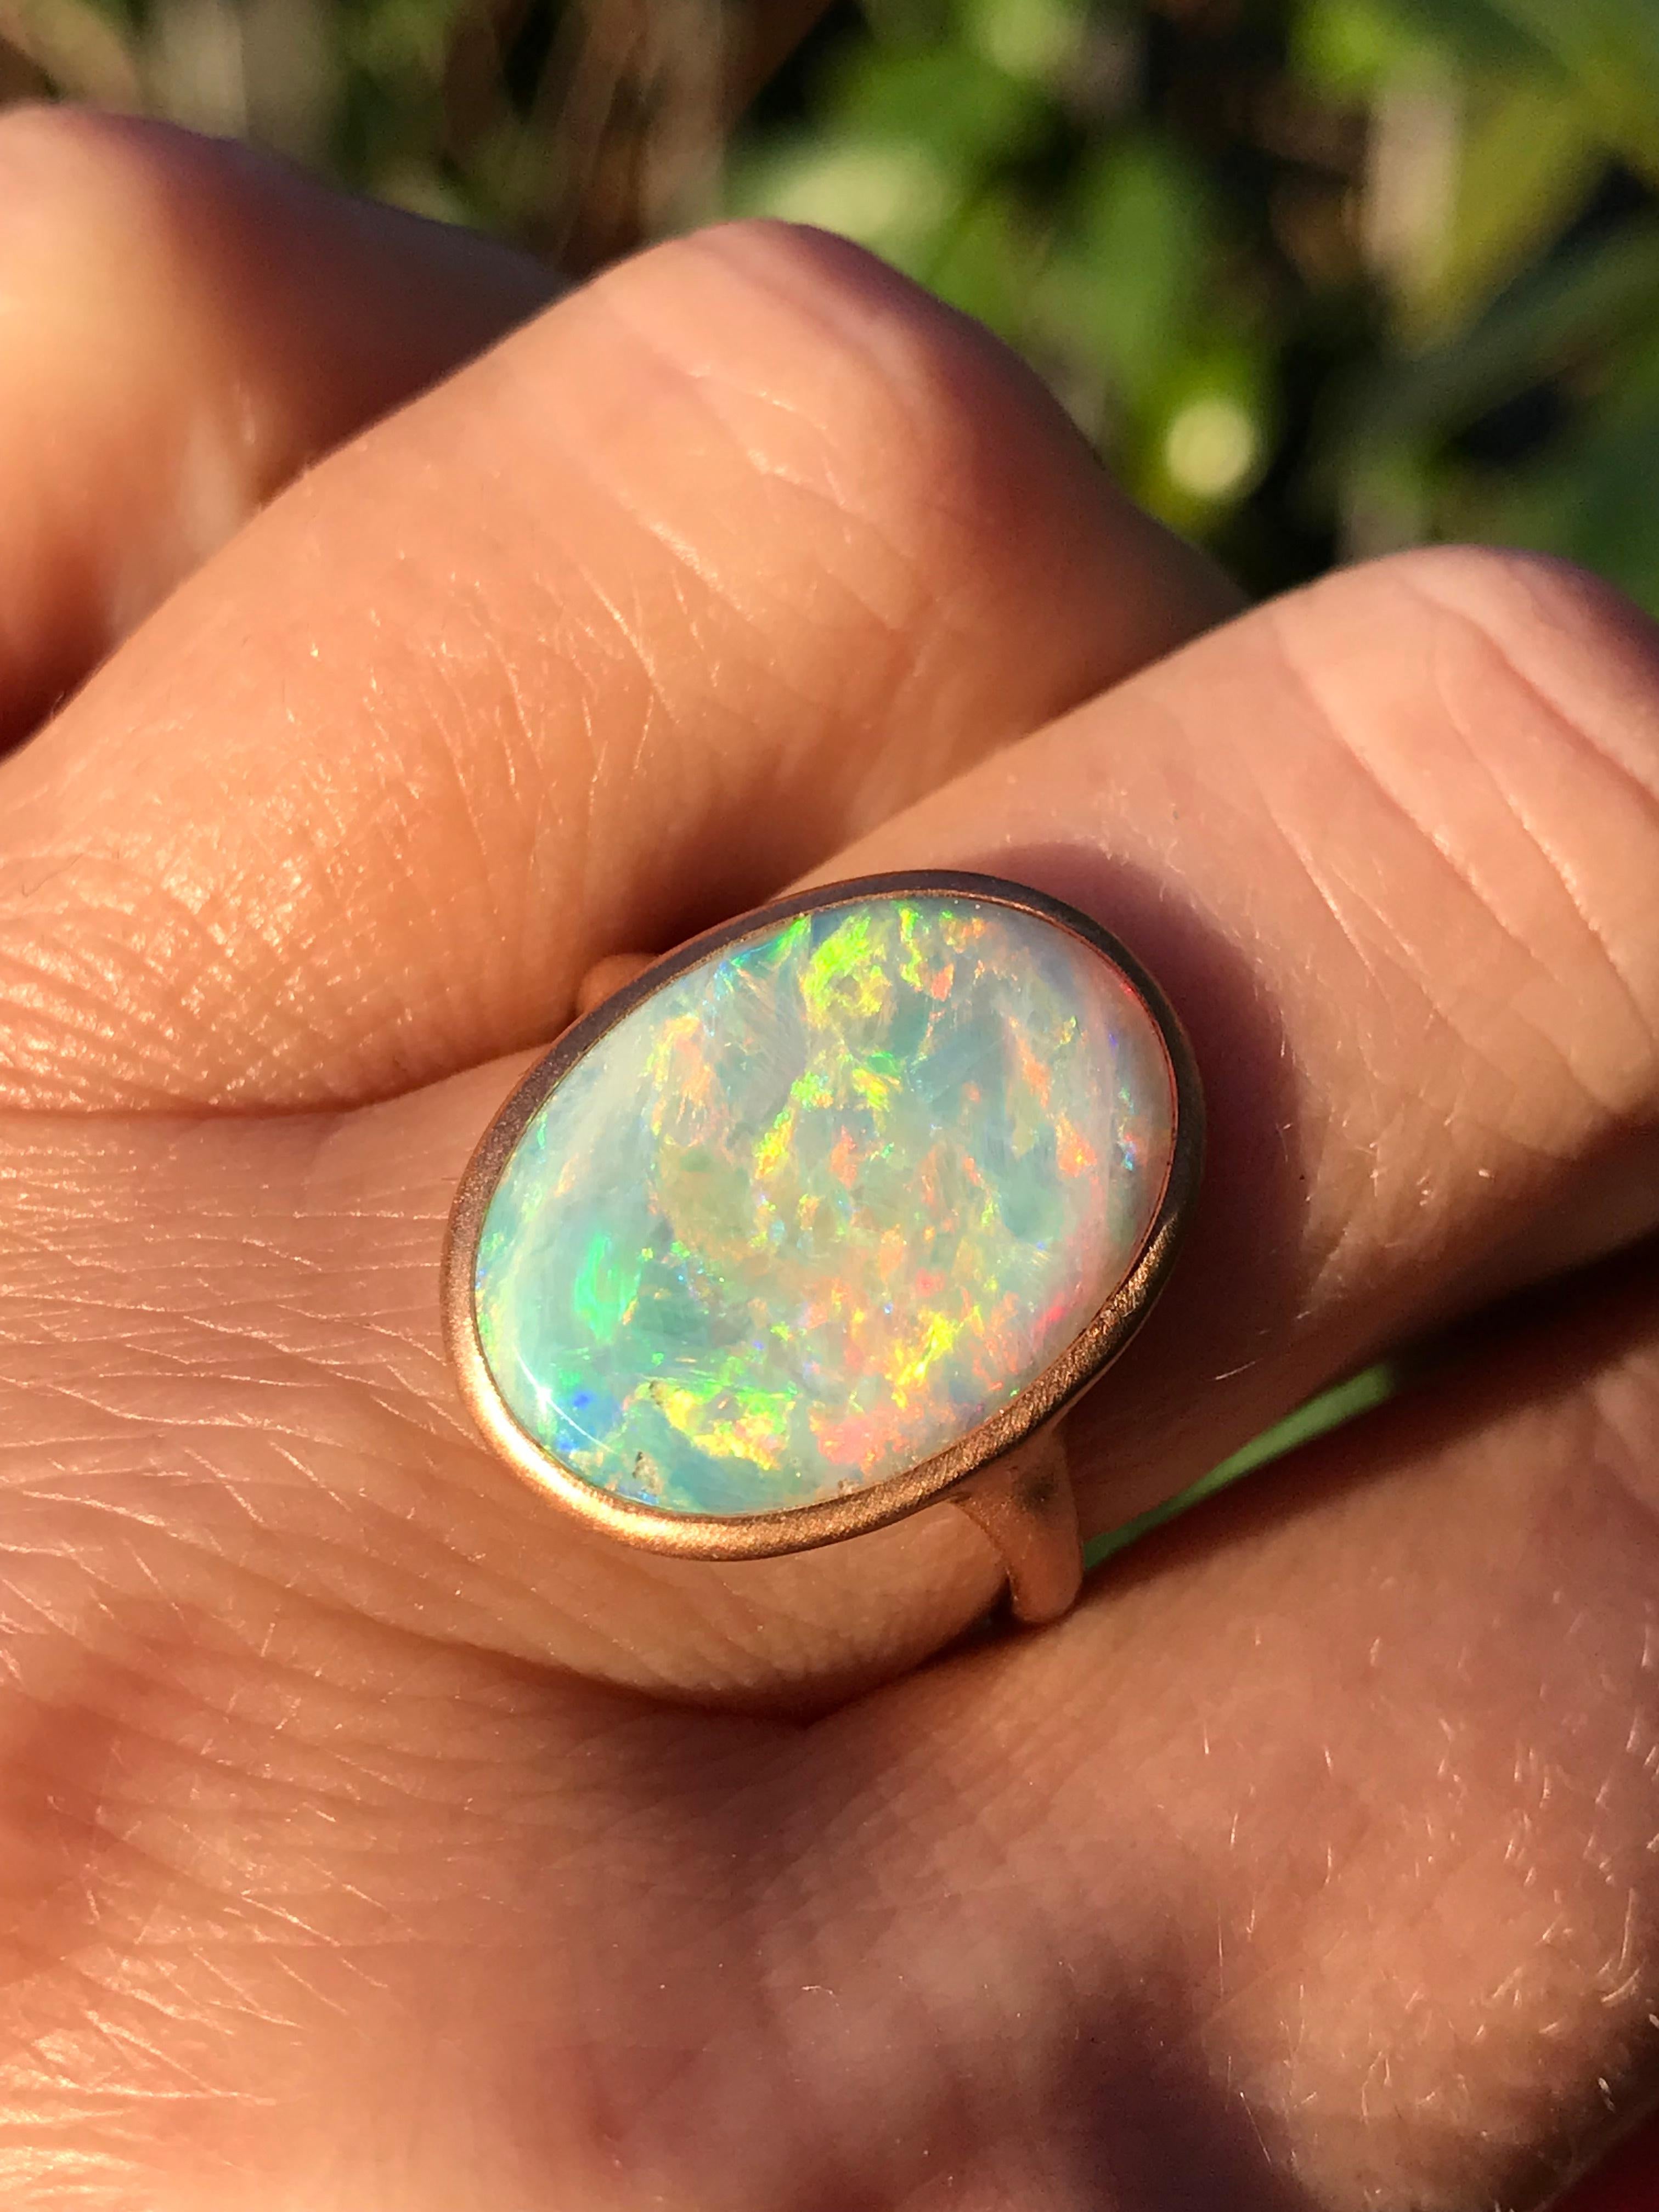 Dalben design One of a kind 18 kt rose  gold ring with an oval cabochon solid Australian Crystal Opal weight 4,09 carats from Coober Pedy  .
The opal has  wonderful blue green reflex especially at sunshine 
Ring size  US 7  -  EU 54 re-sizable . 